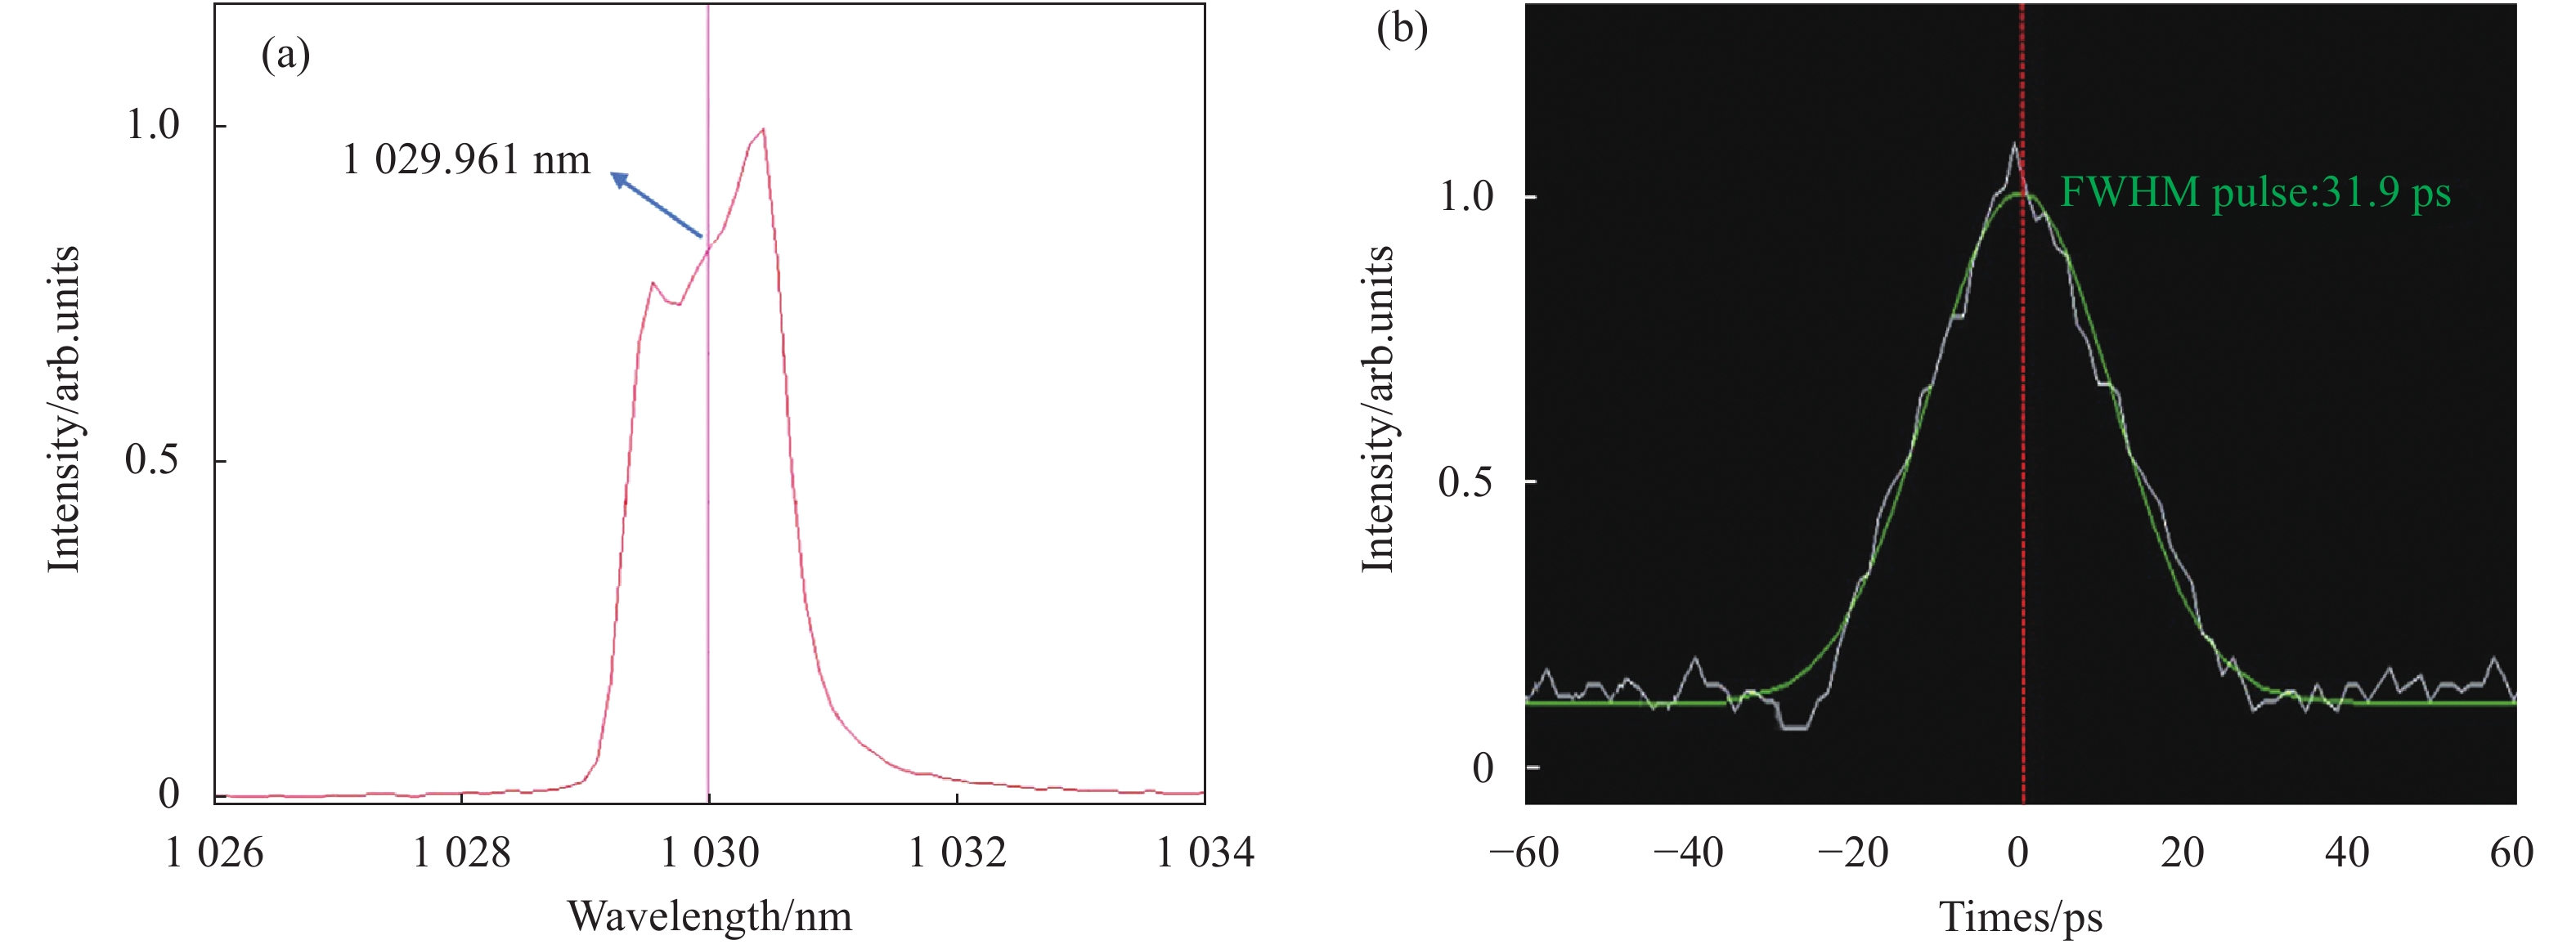 (a) Spectrum, and (b) autocorrelation curve of the pulses after grating stretching